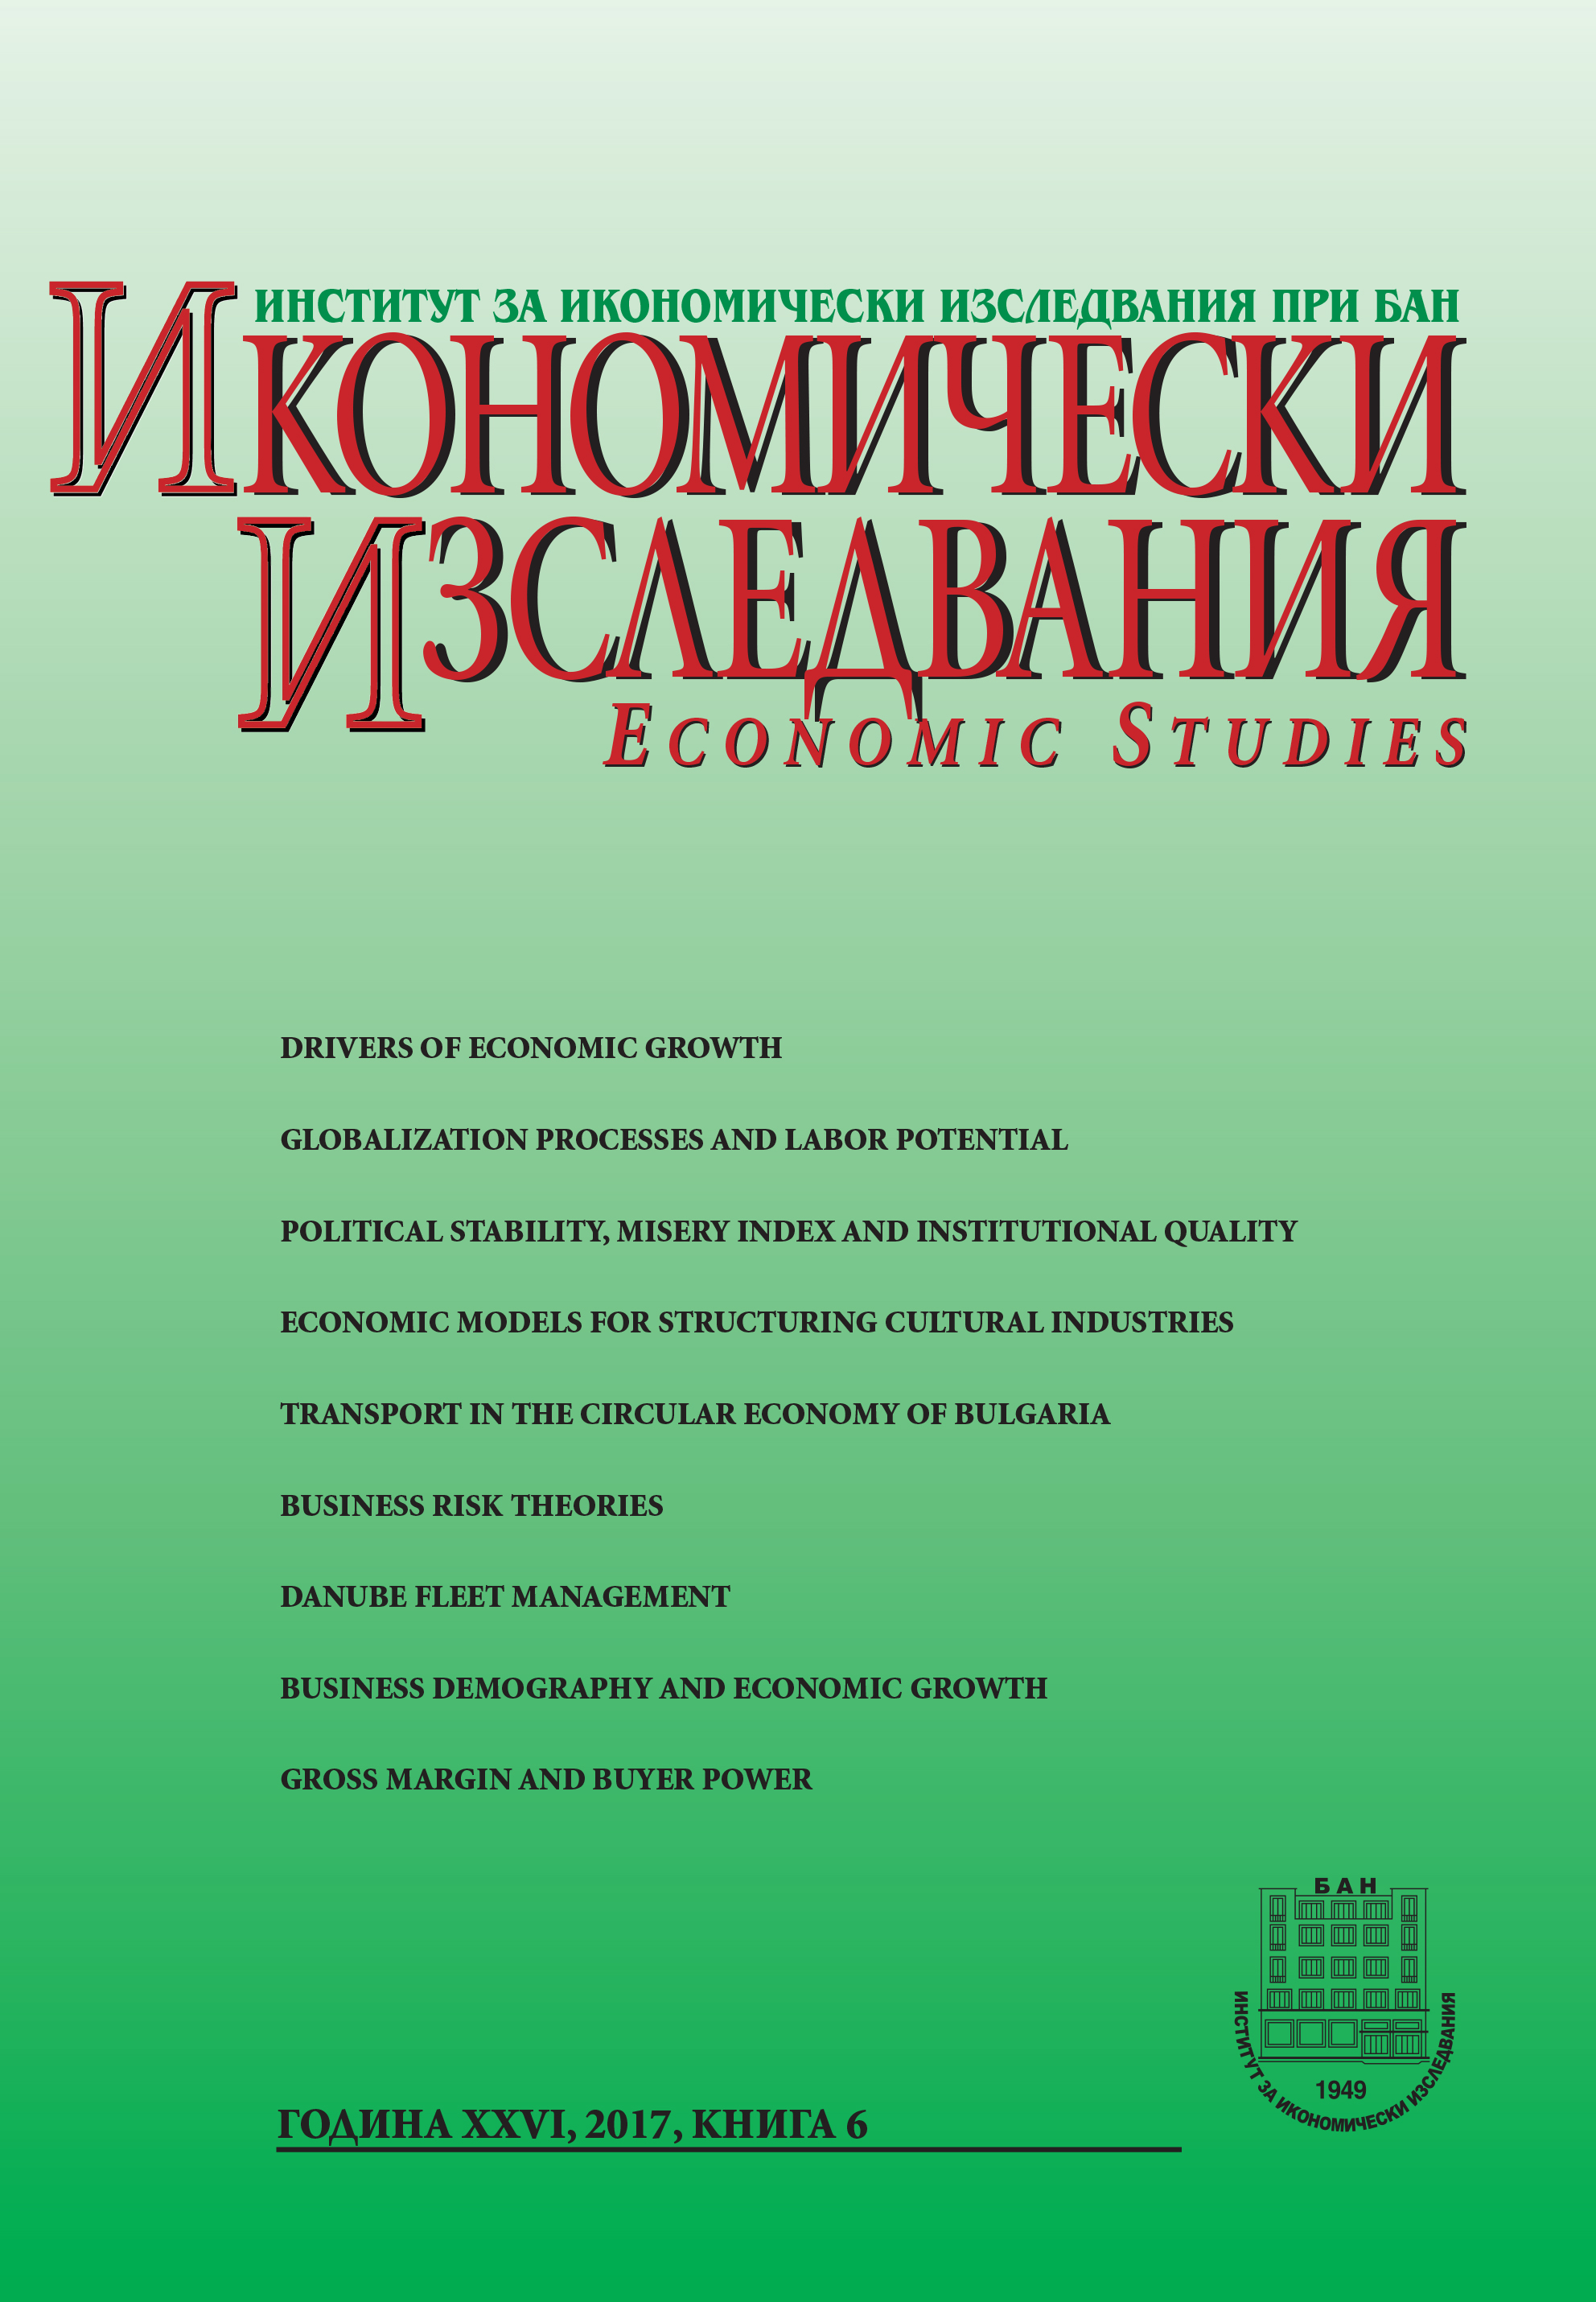 Regional Disproportions – Business Demography and Economic Growth (Example of Bulgaria) Cover Image